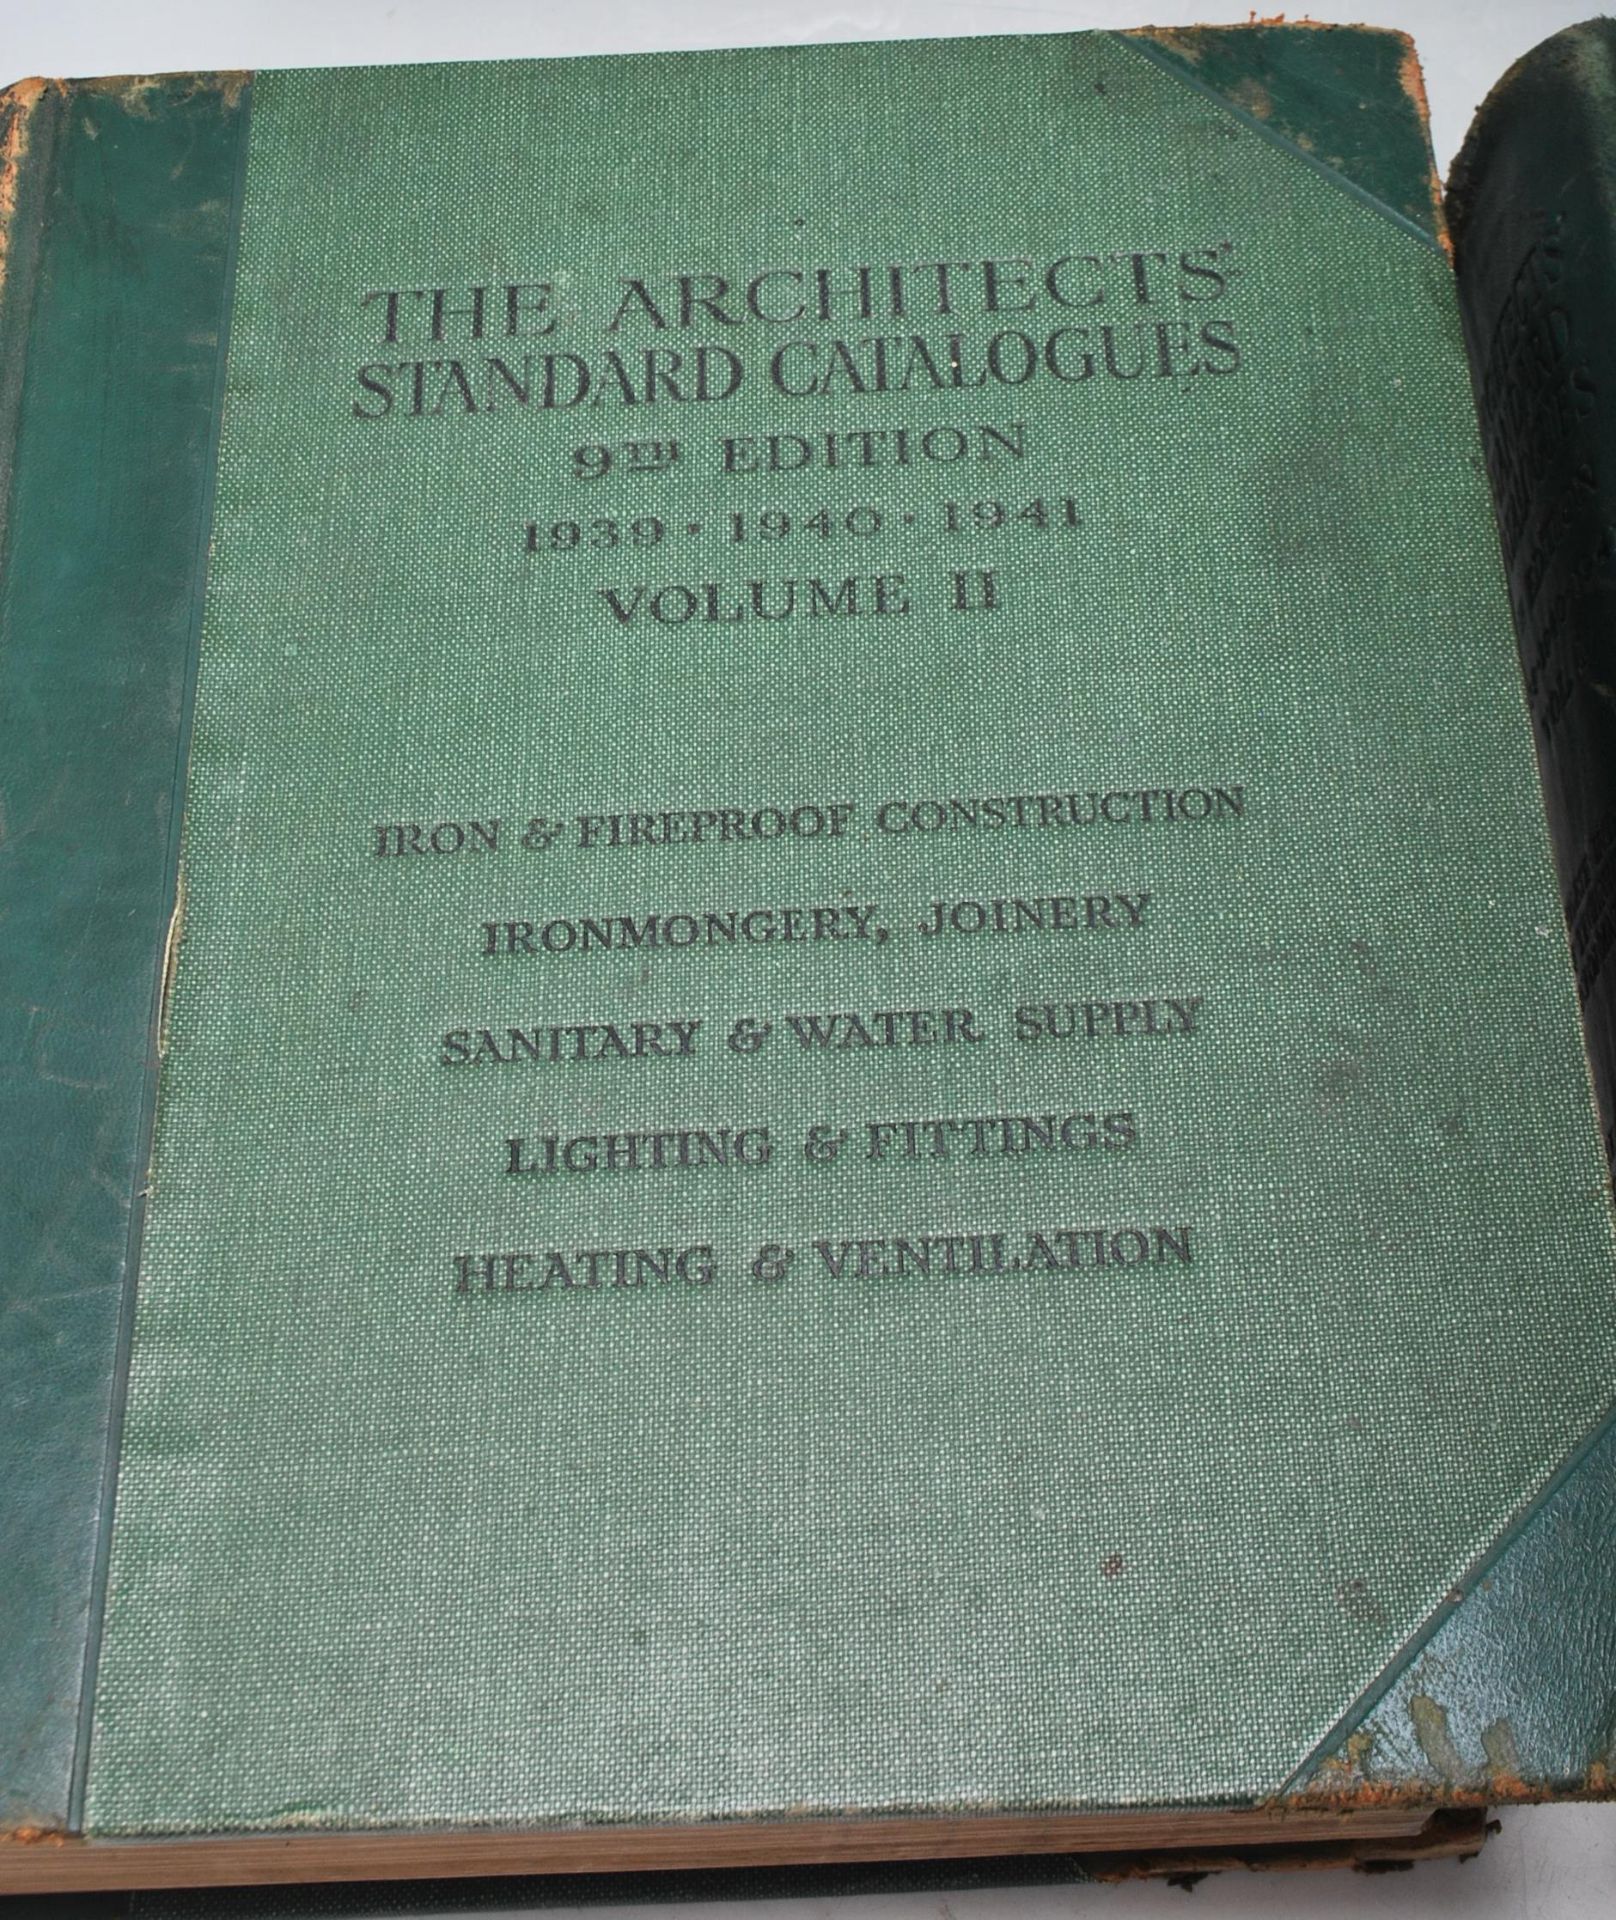 PAIR OF 1930'S ARCHITECTS STANDARD CATALOGUES - Image 2 of 13